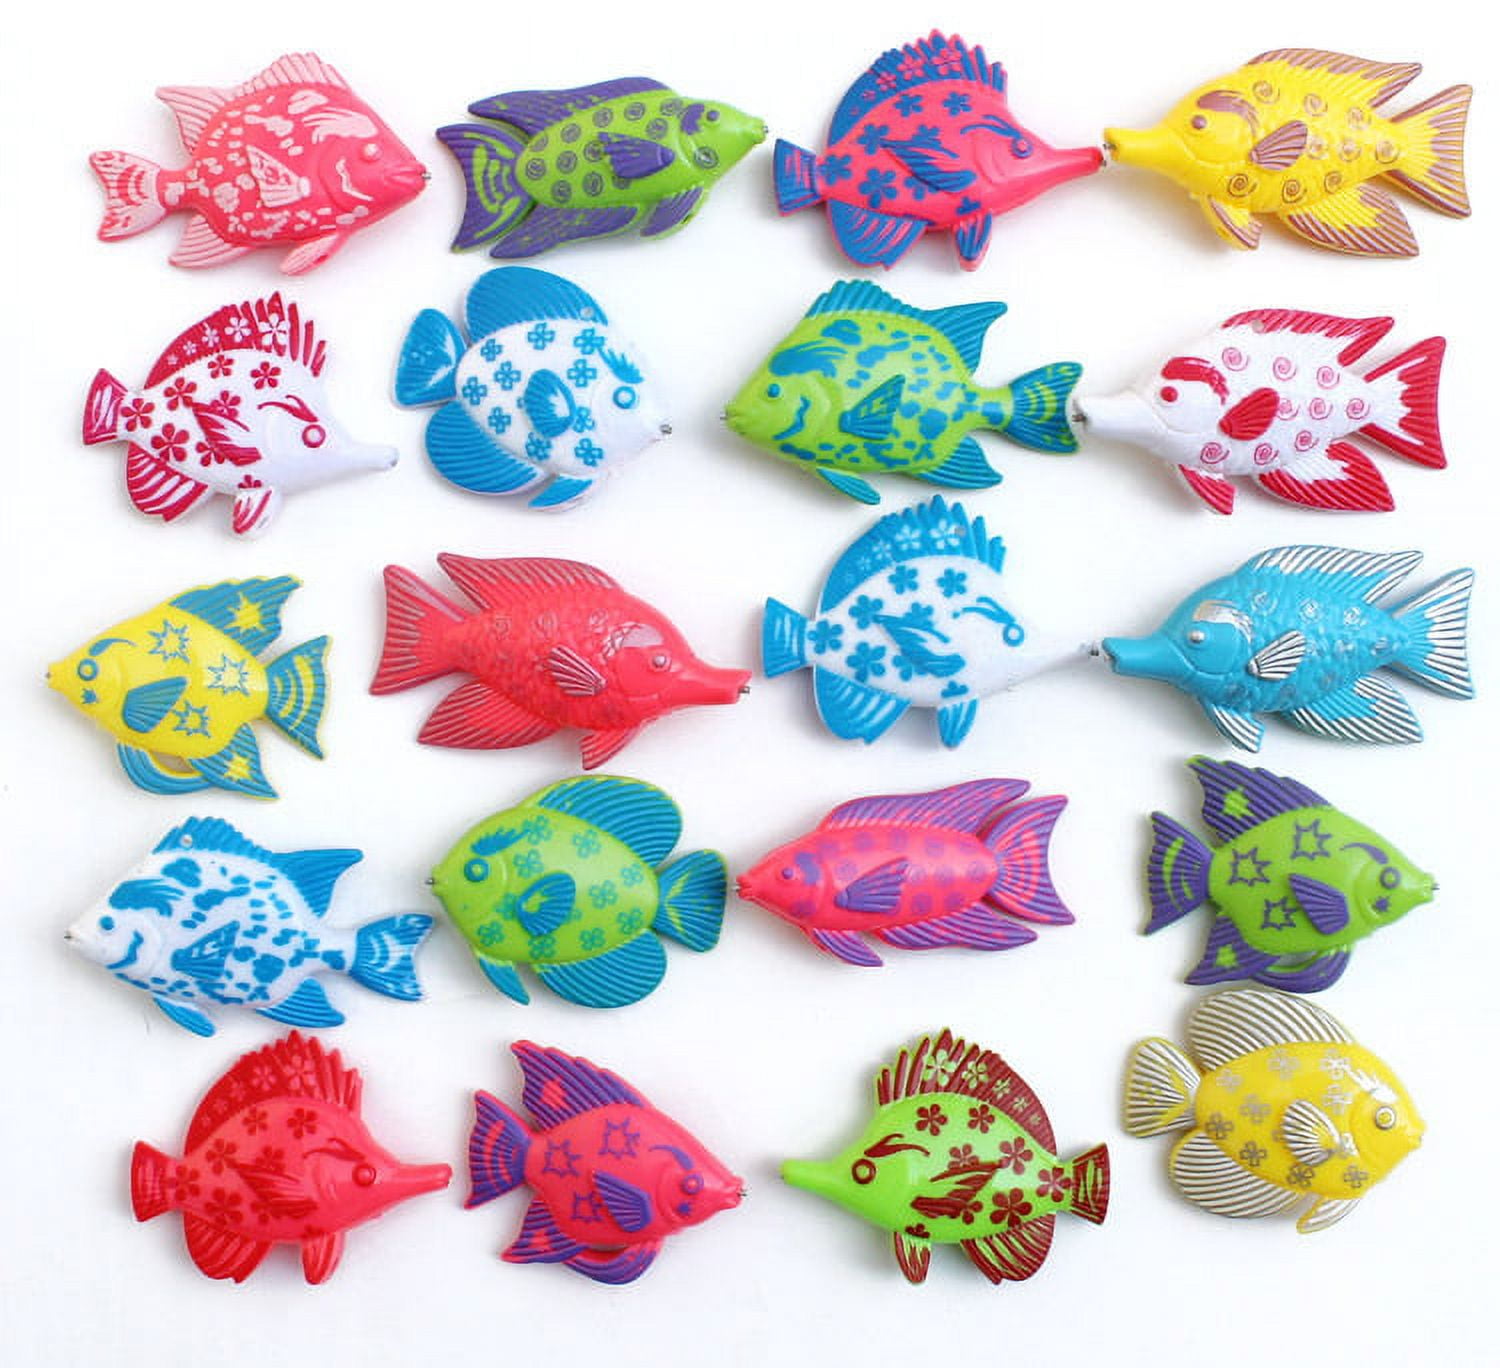 RONSHIN Magnetic Fishing Toy Set Fun Time Fishing Game With 1 Fishing Rod  and 6 Cute Fishes for Children Random Color 